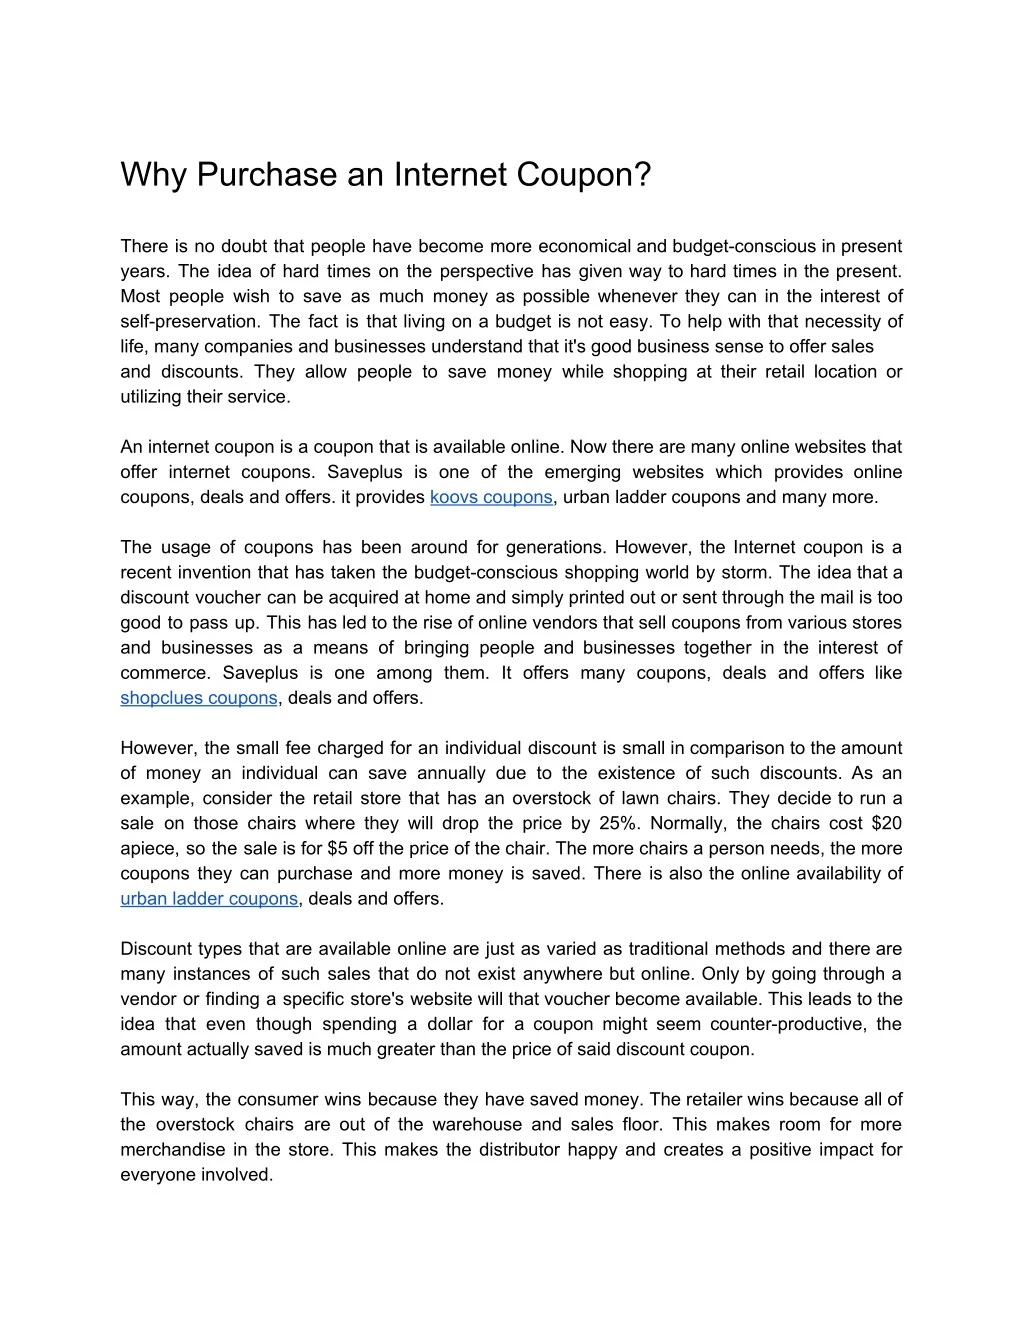 why purchase an internet coupon